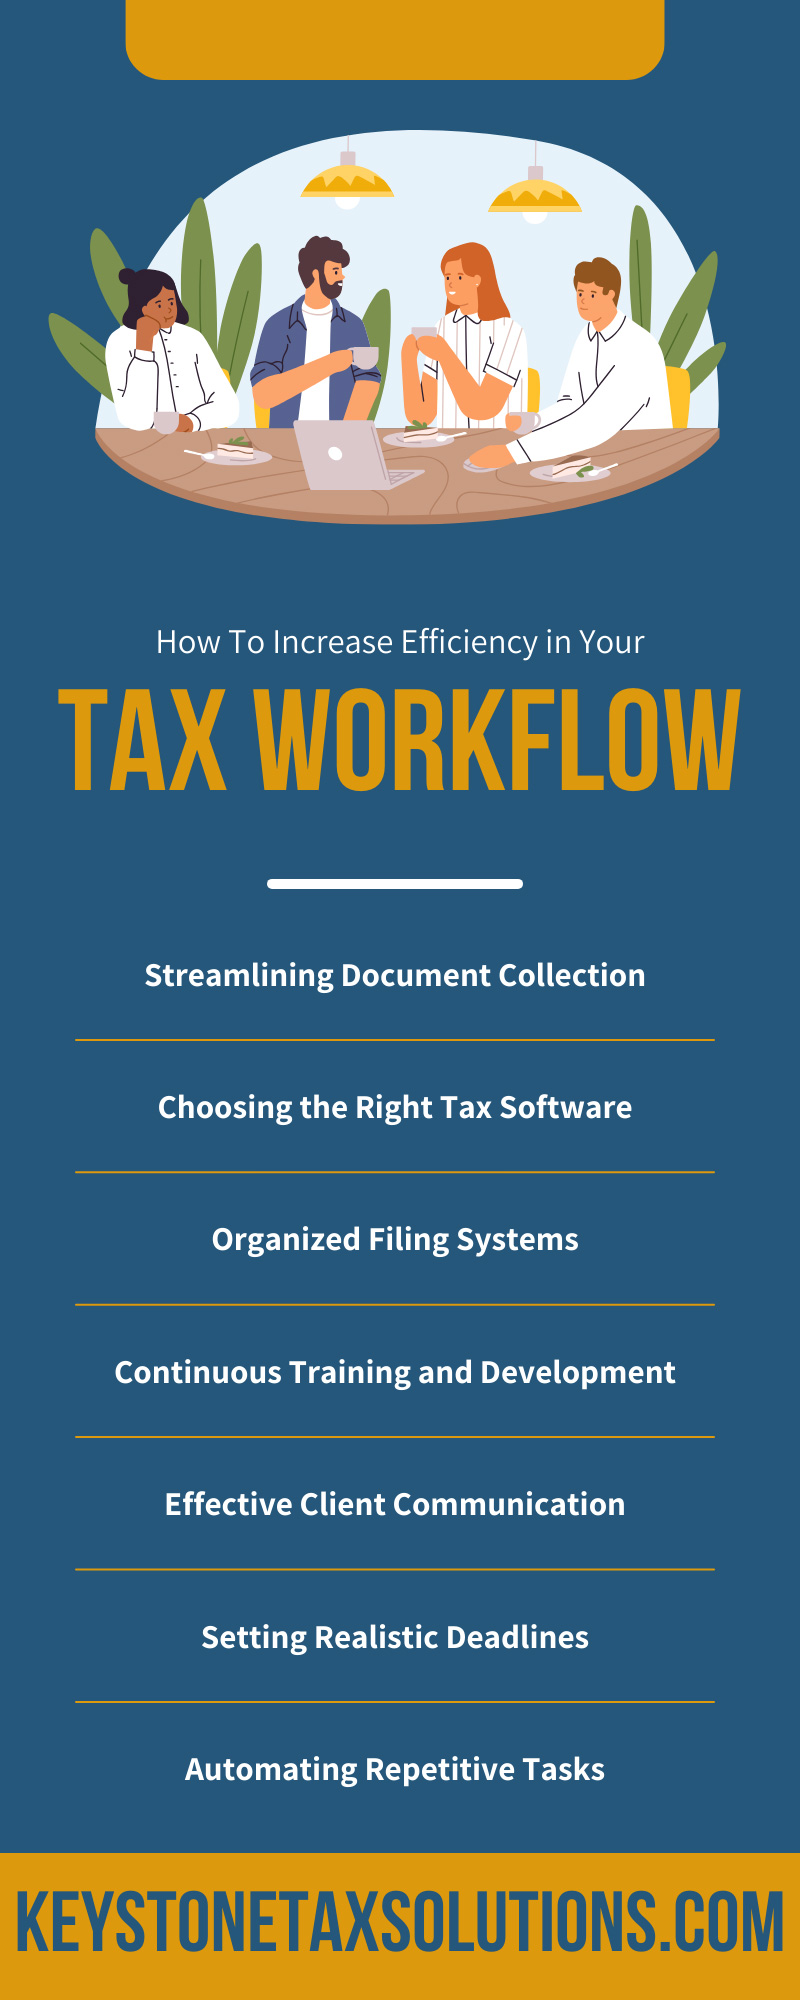 How To Increase Efficiency in Your Tax Workflow